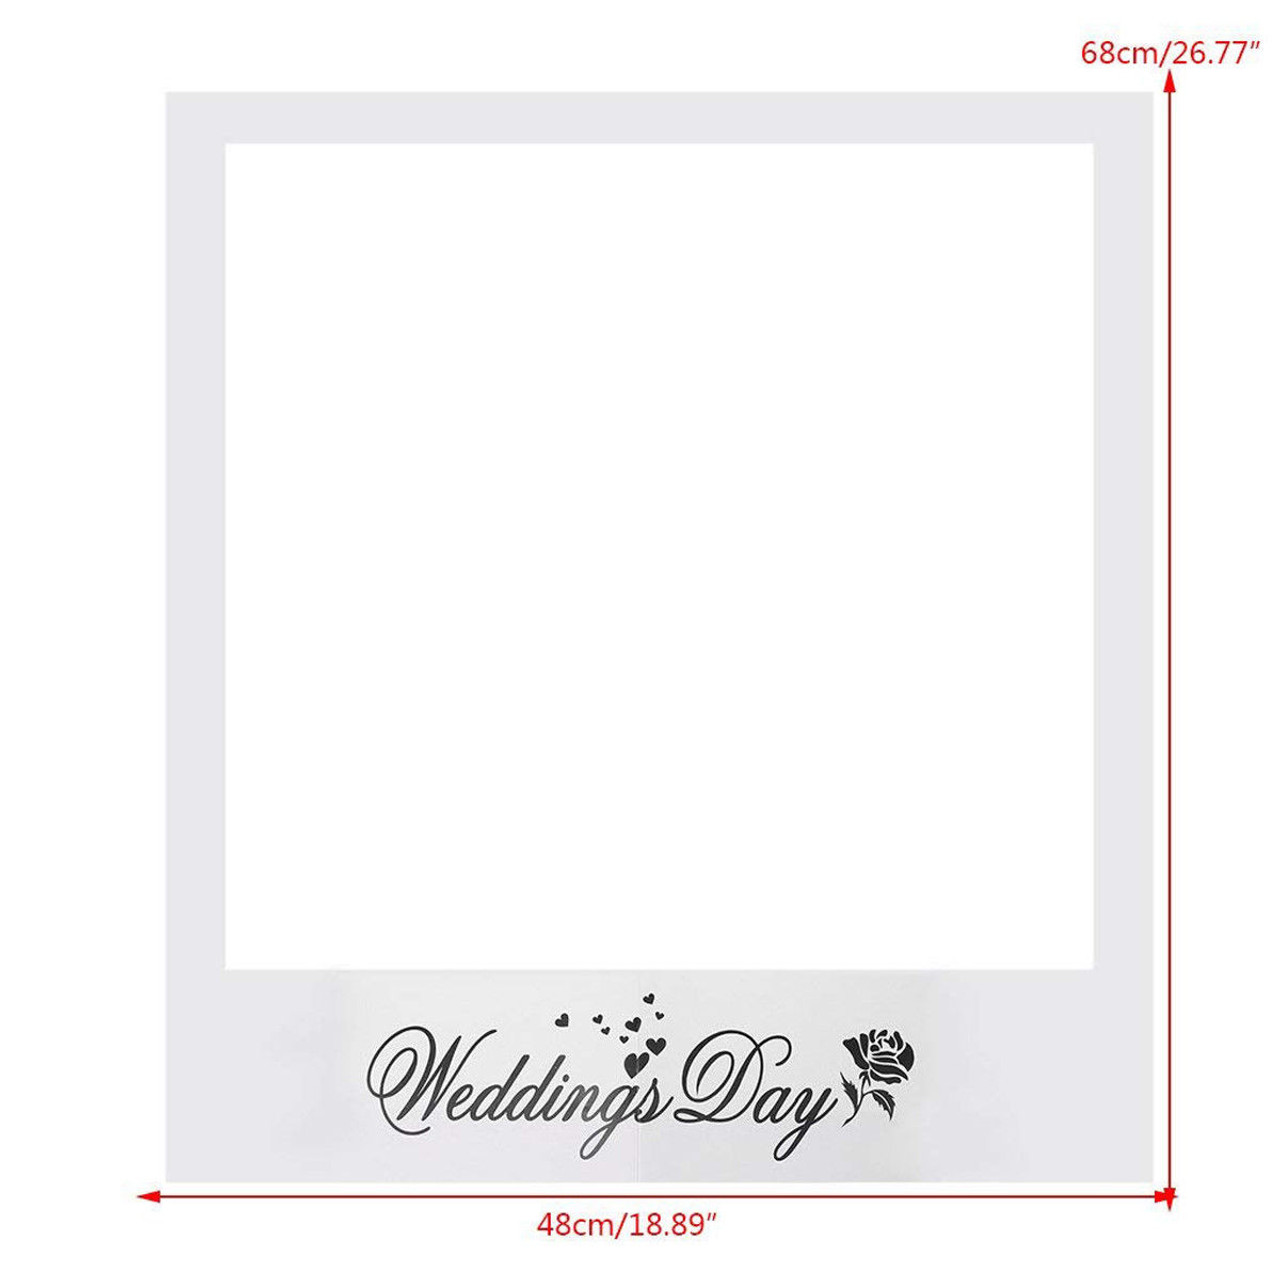 Wedding Day Photo Booth Large Cardboard Selfie Photo Frame - Event ...